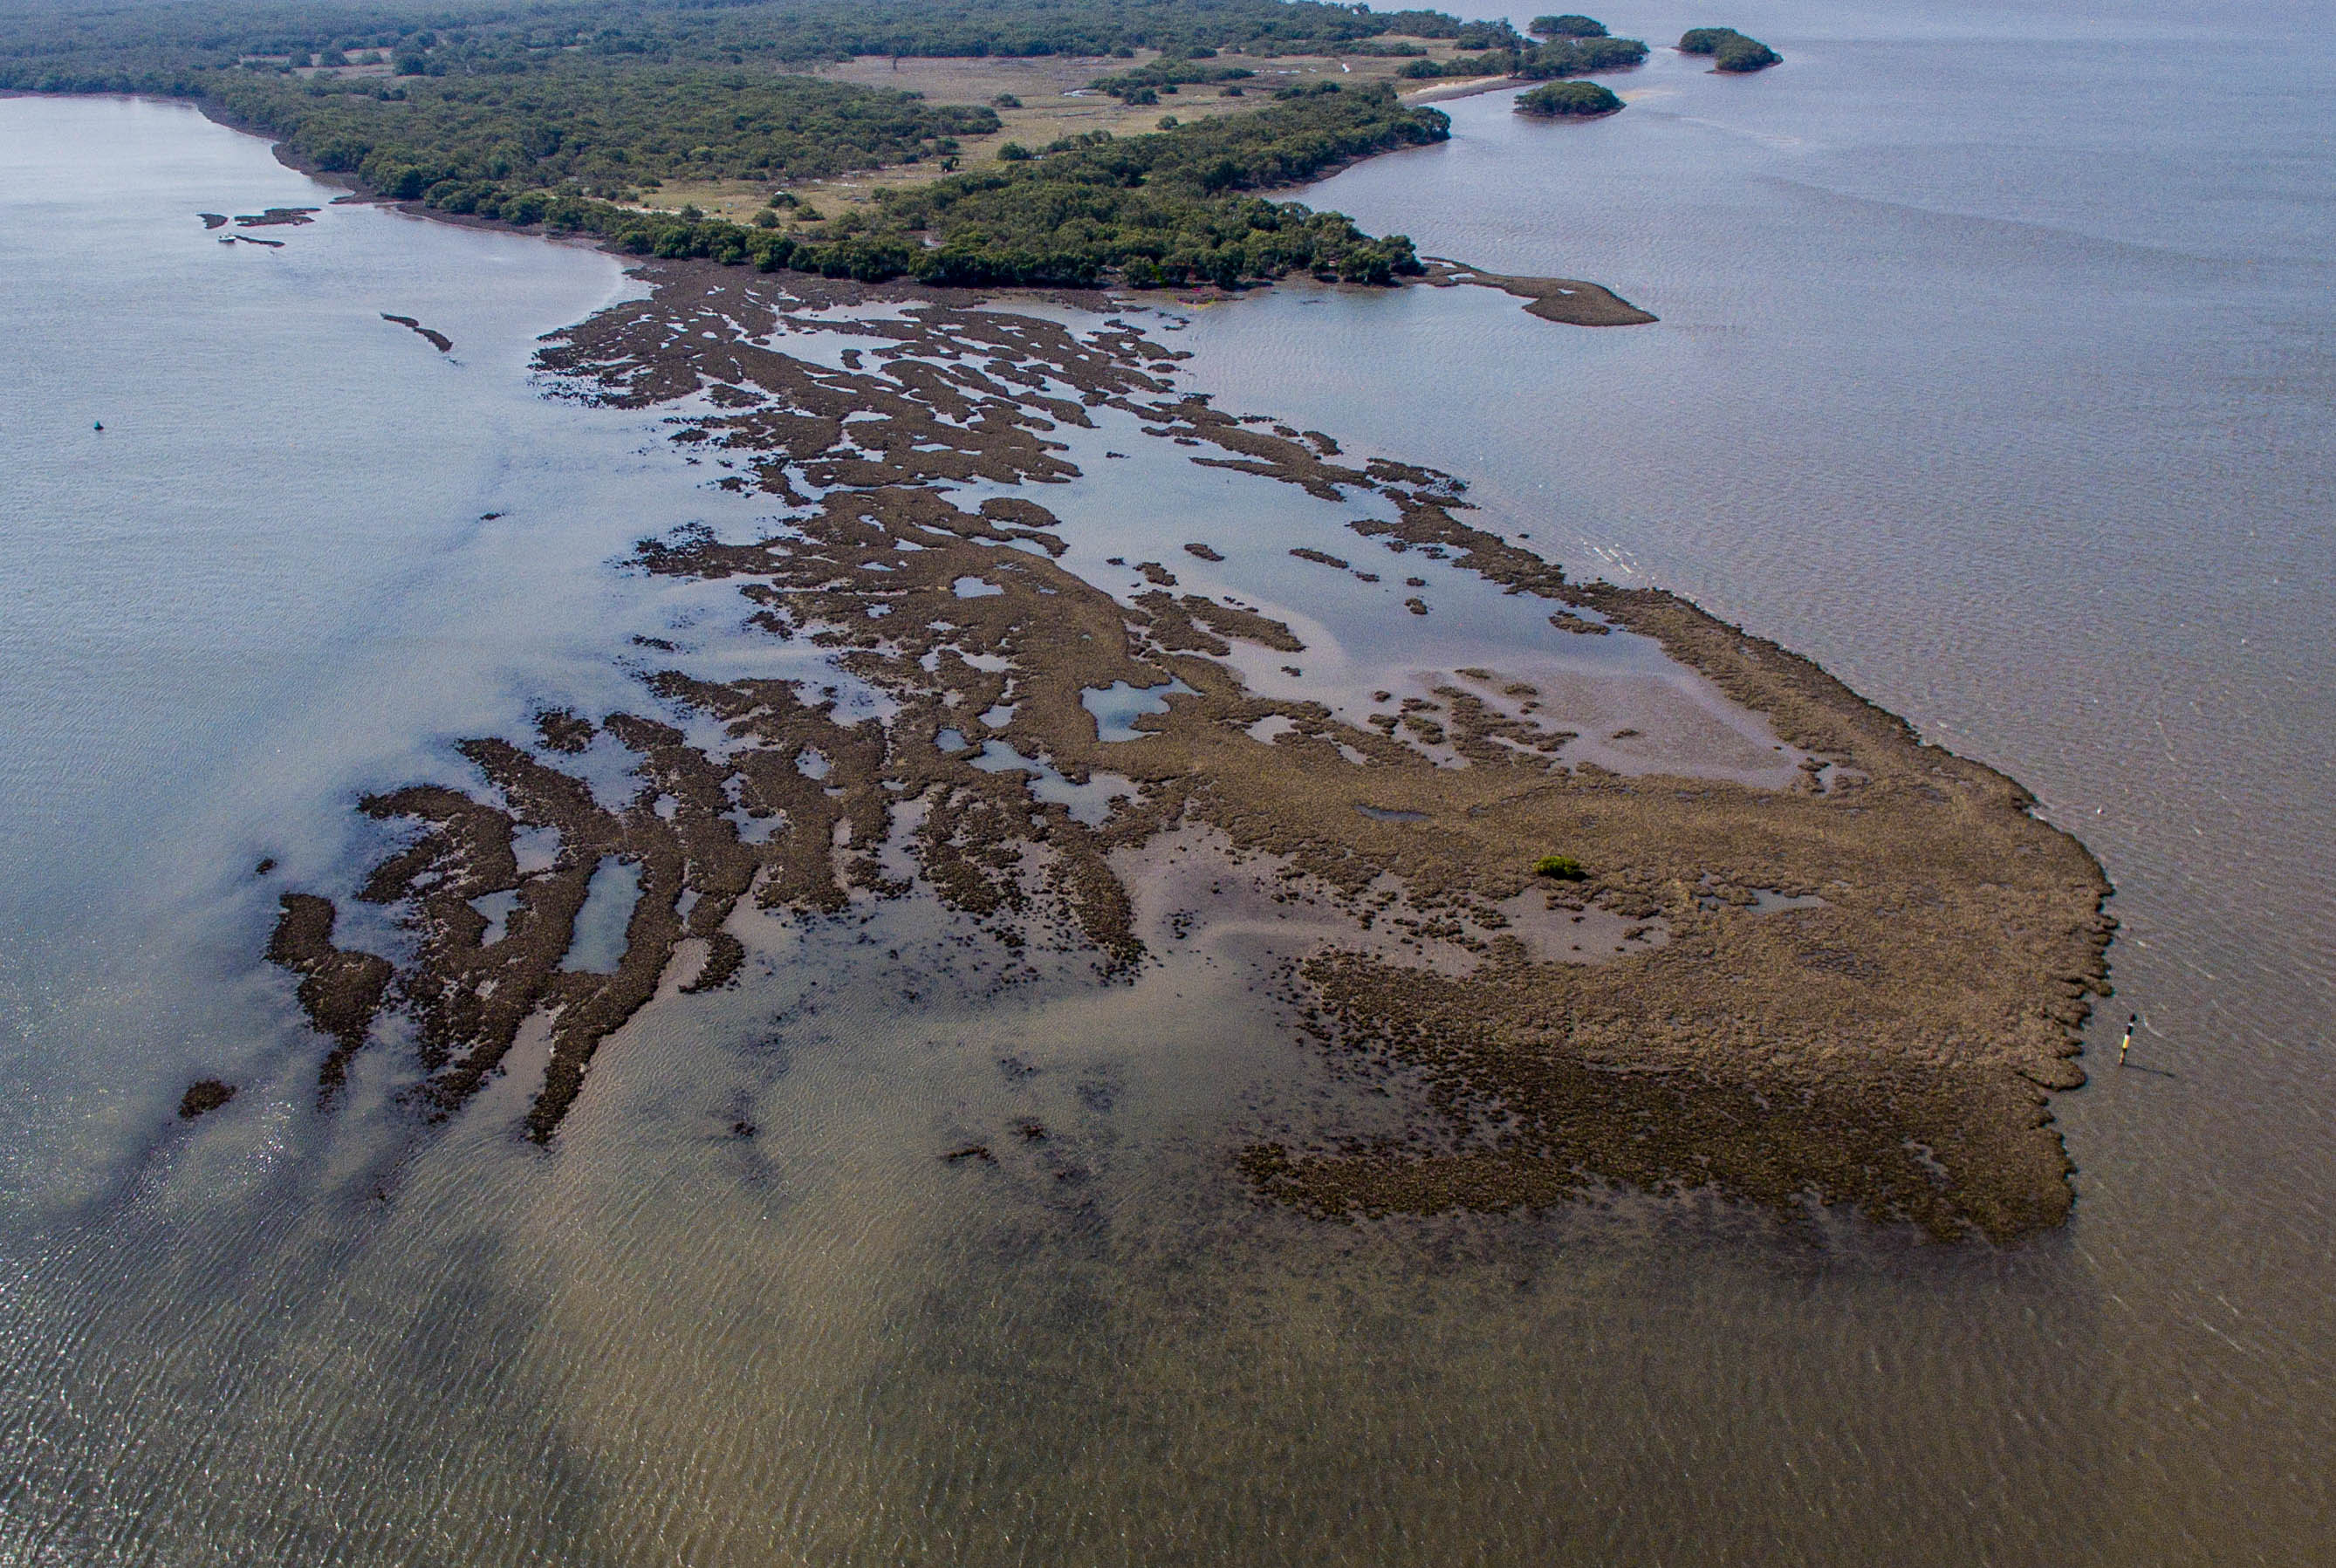 An aerial view of a natural oyster reef